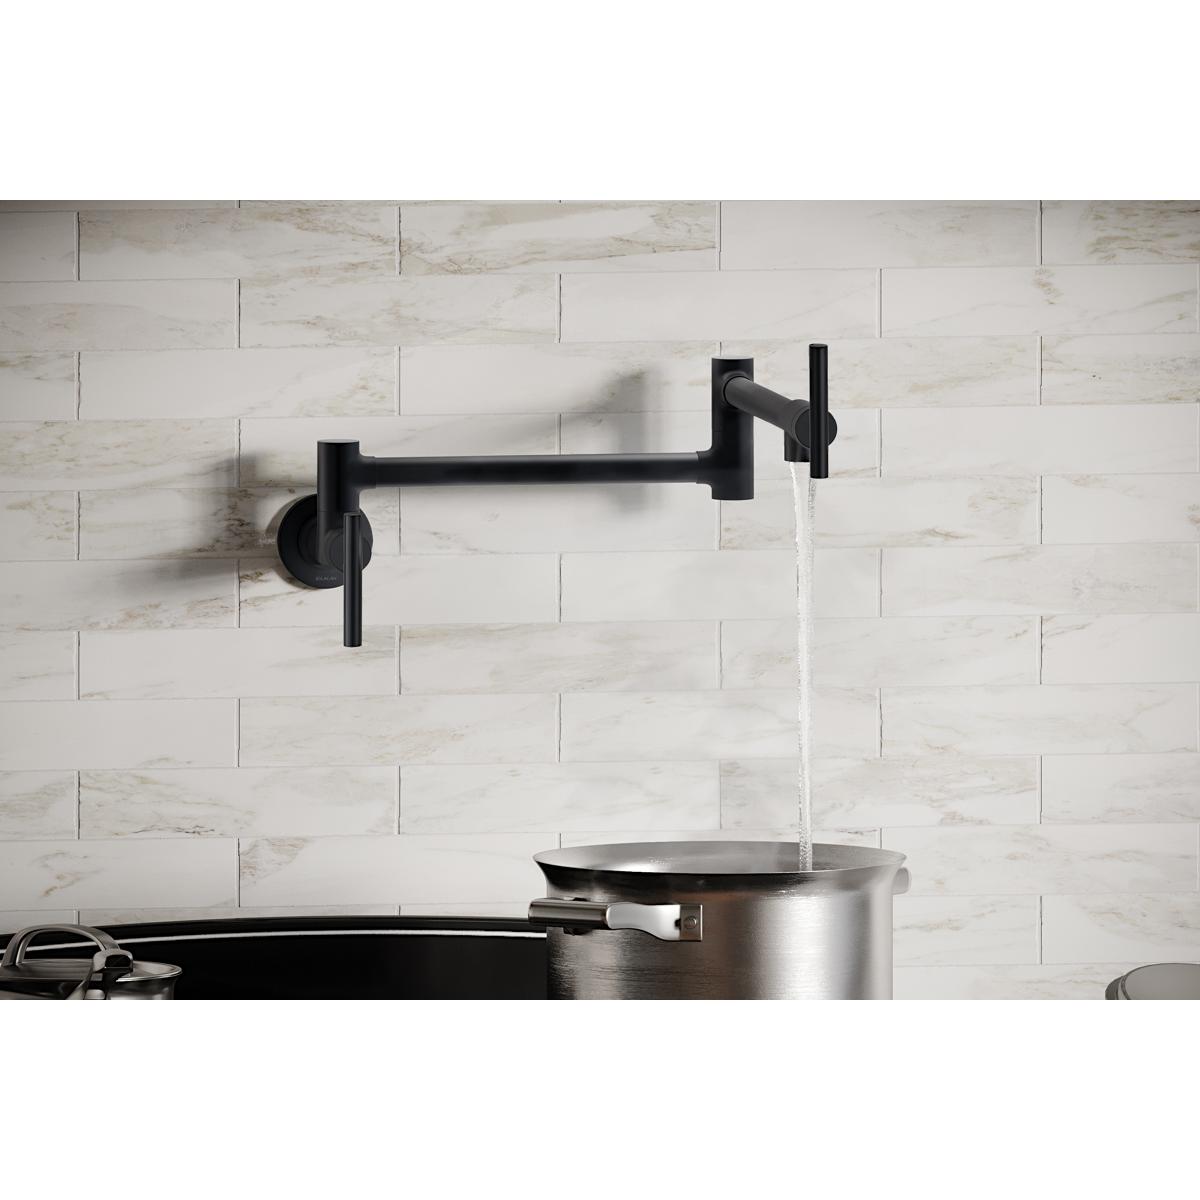 Elkay Avado Wall Mount Single Hole Pot Filler Kitchen Faucet with Lever Handles